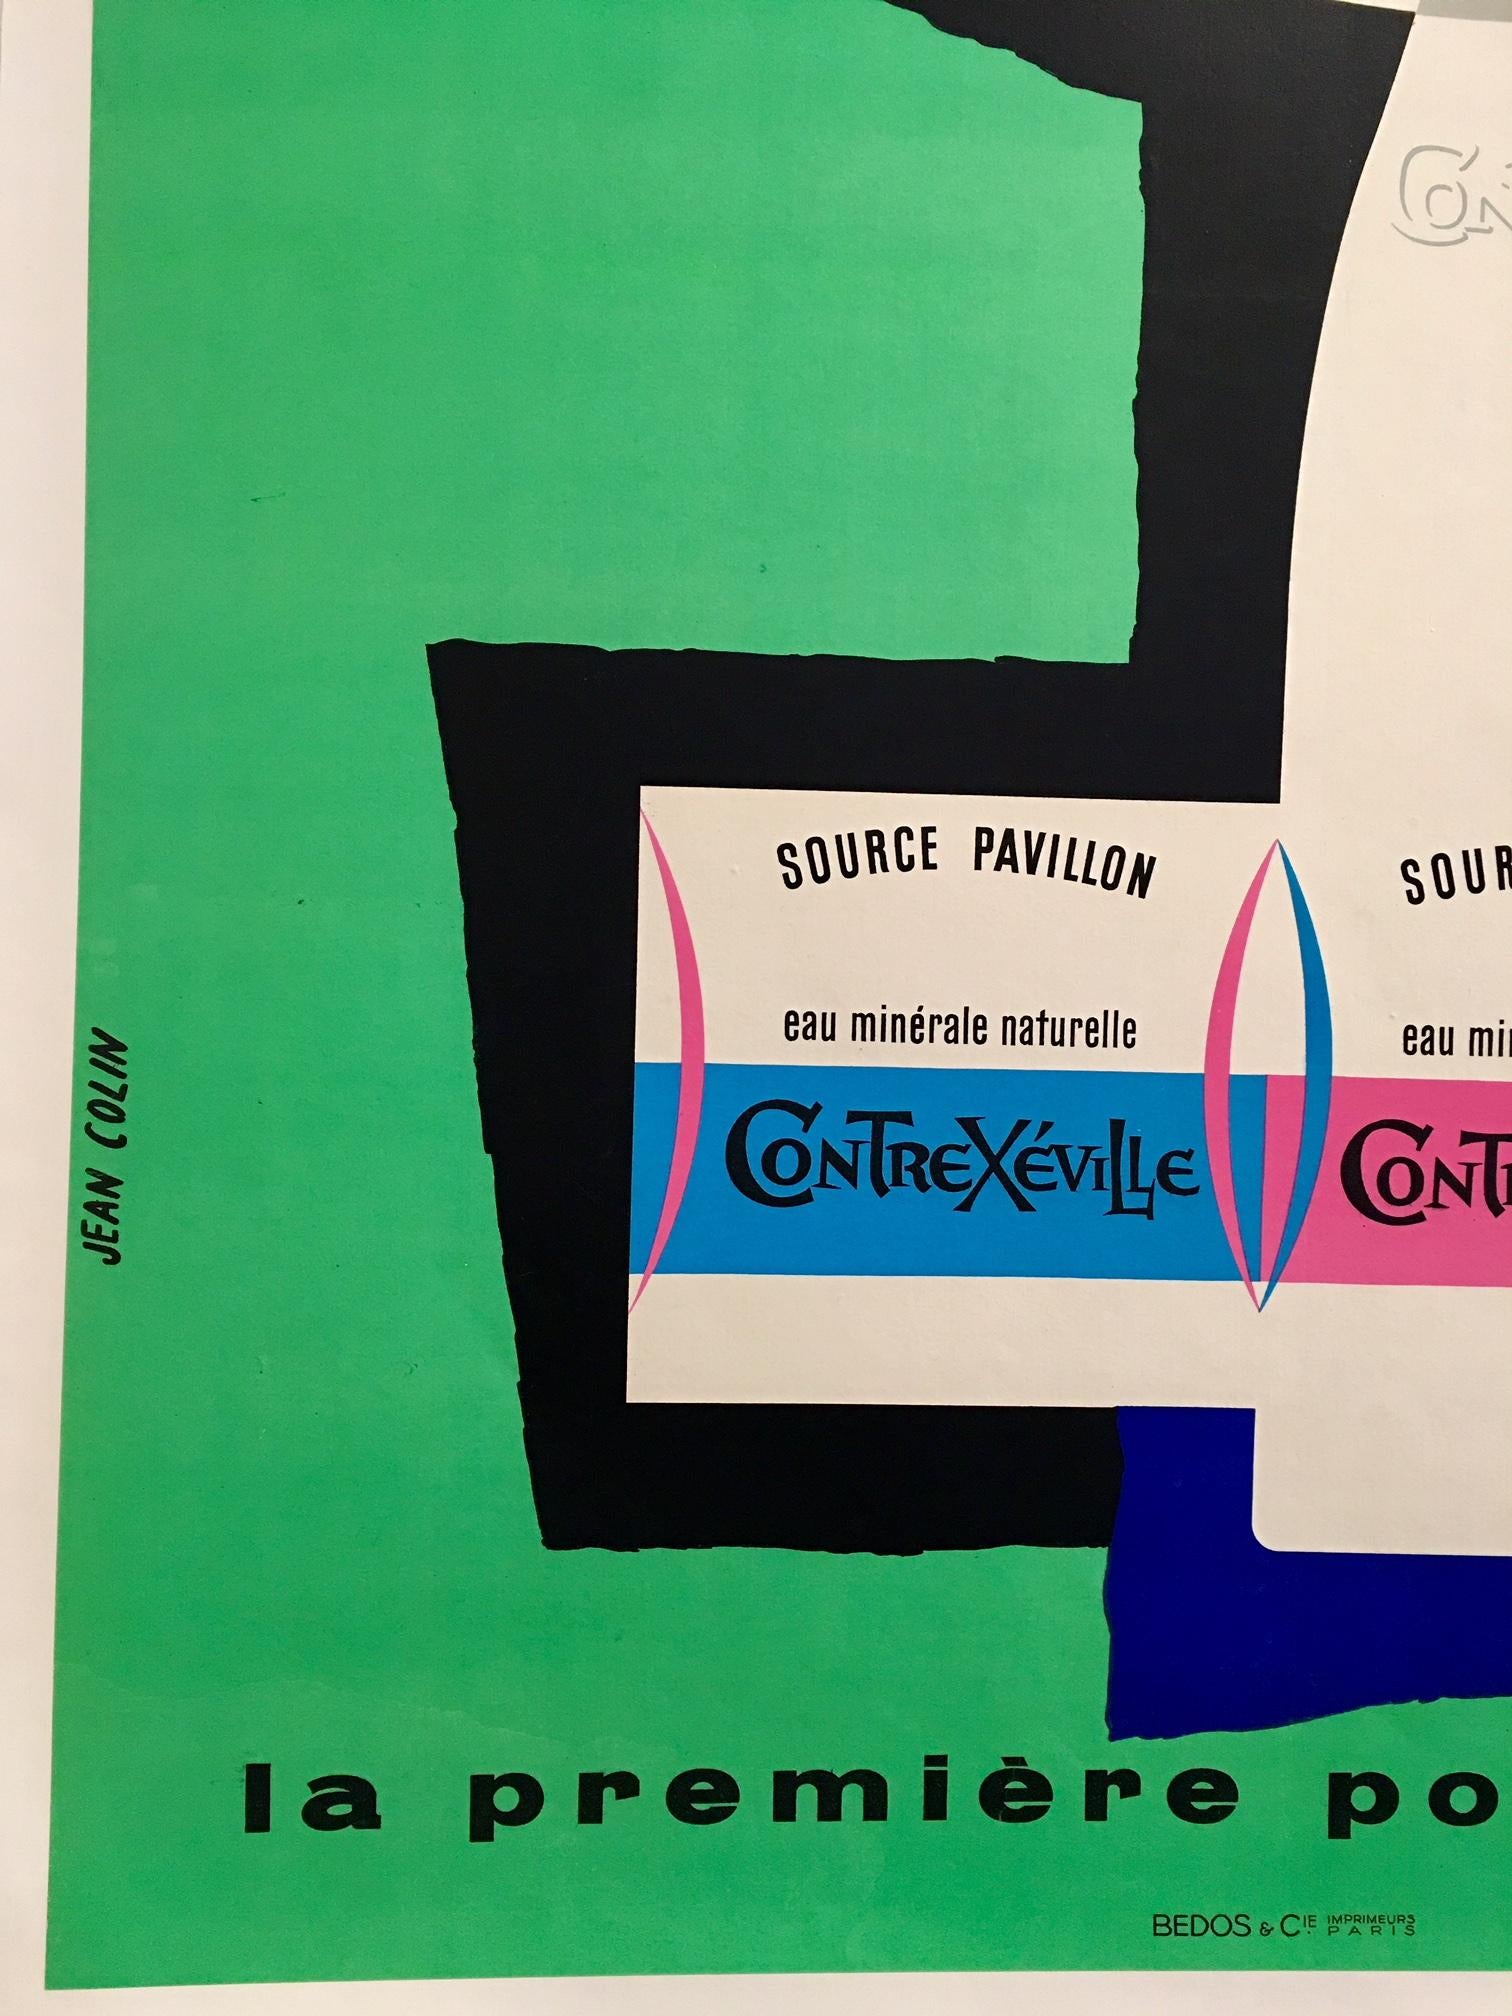 Mid-Century Modern Original Vintage Poster, Contrexeville by Jean Colin, 1954